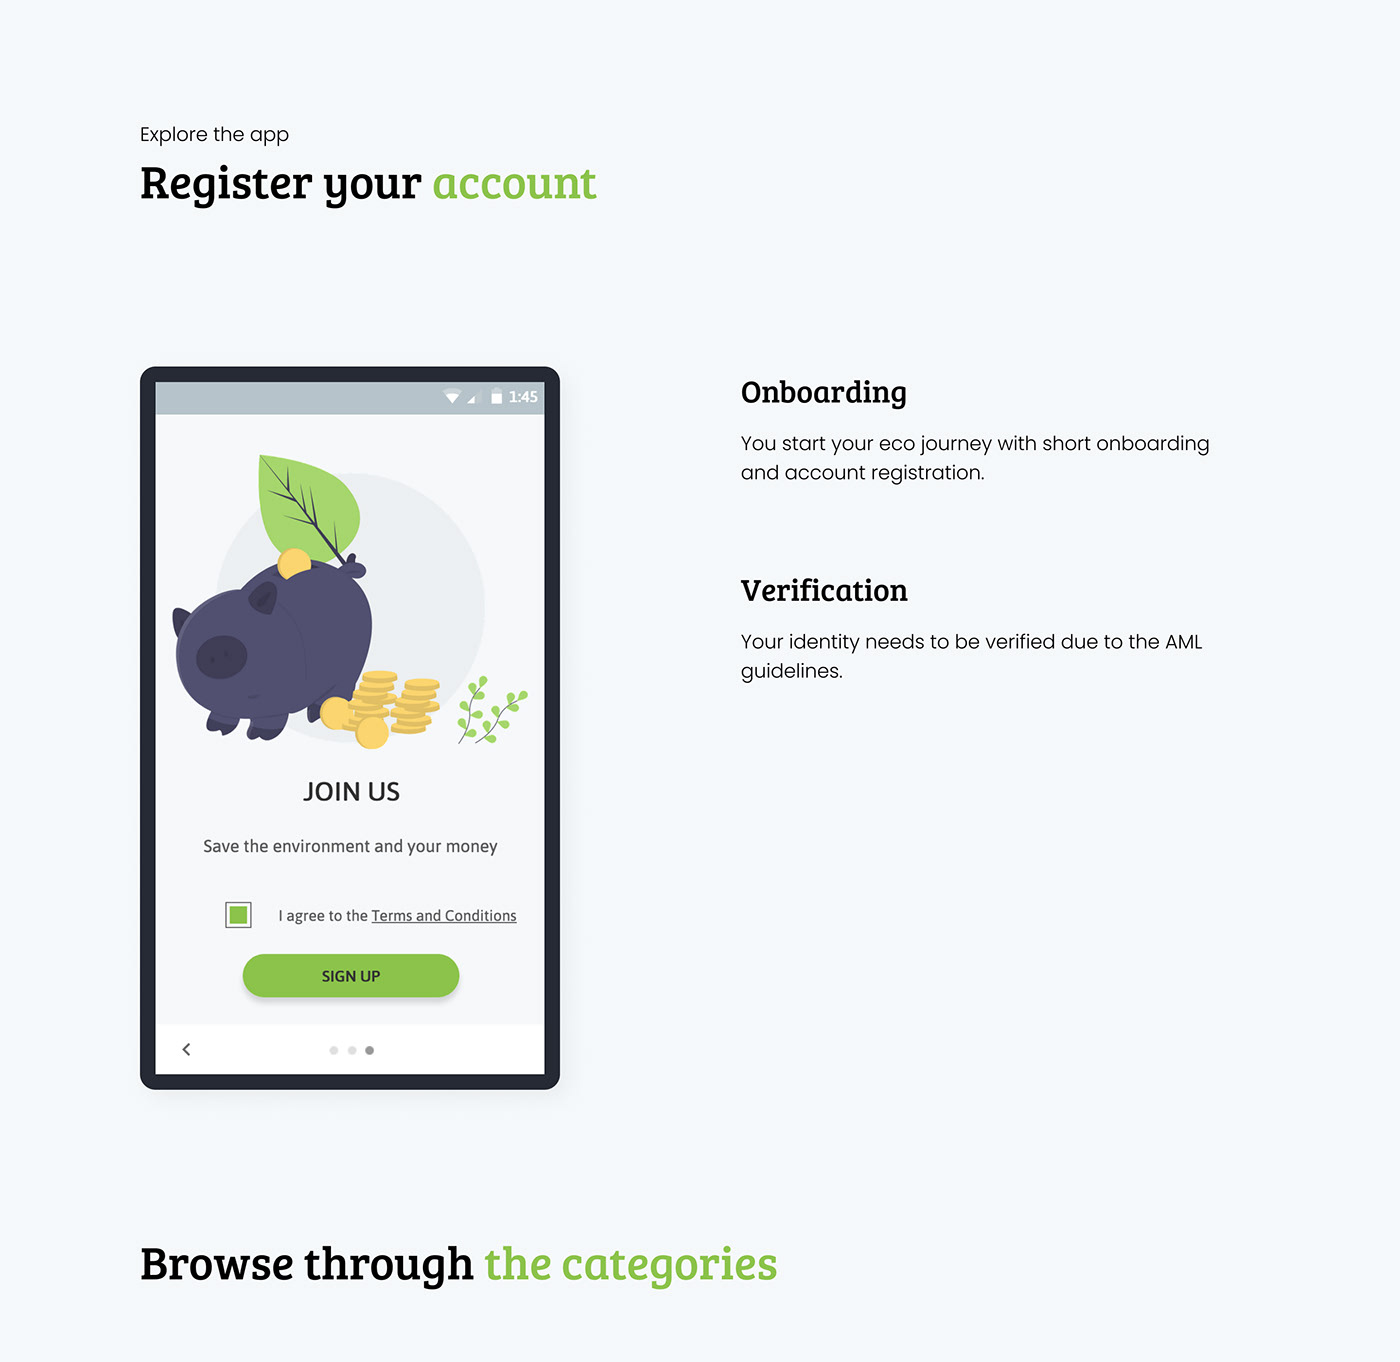 Fintech eco saving prototype android material design ux green app UI